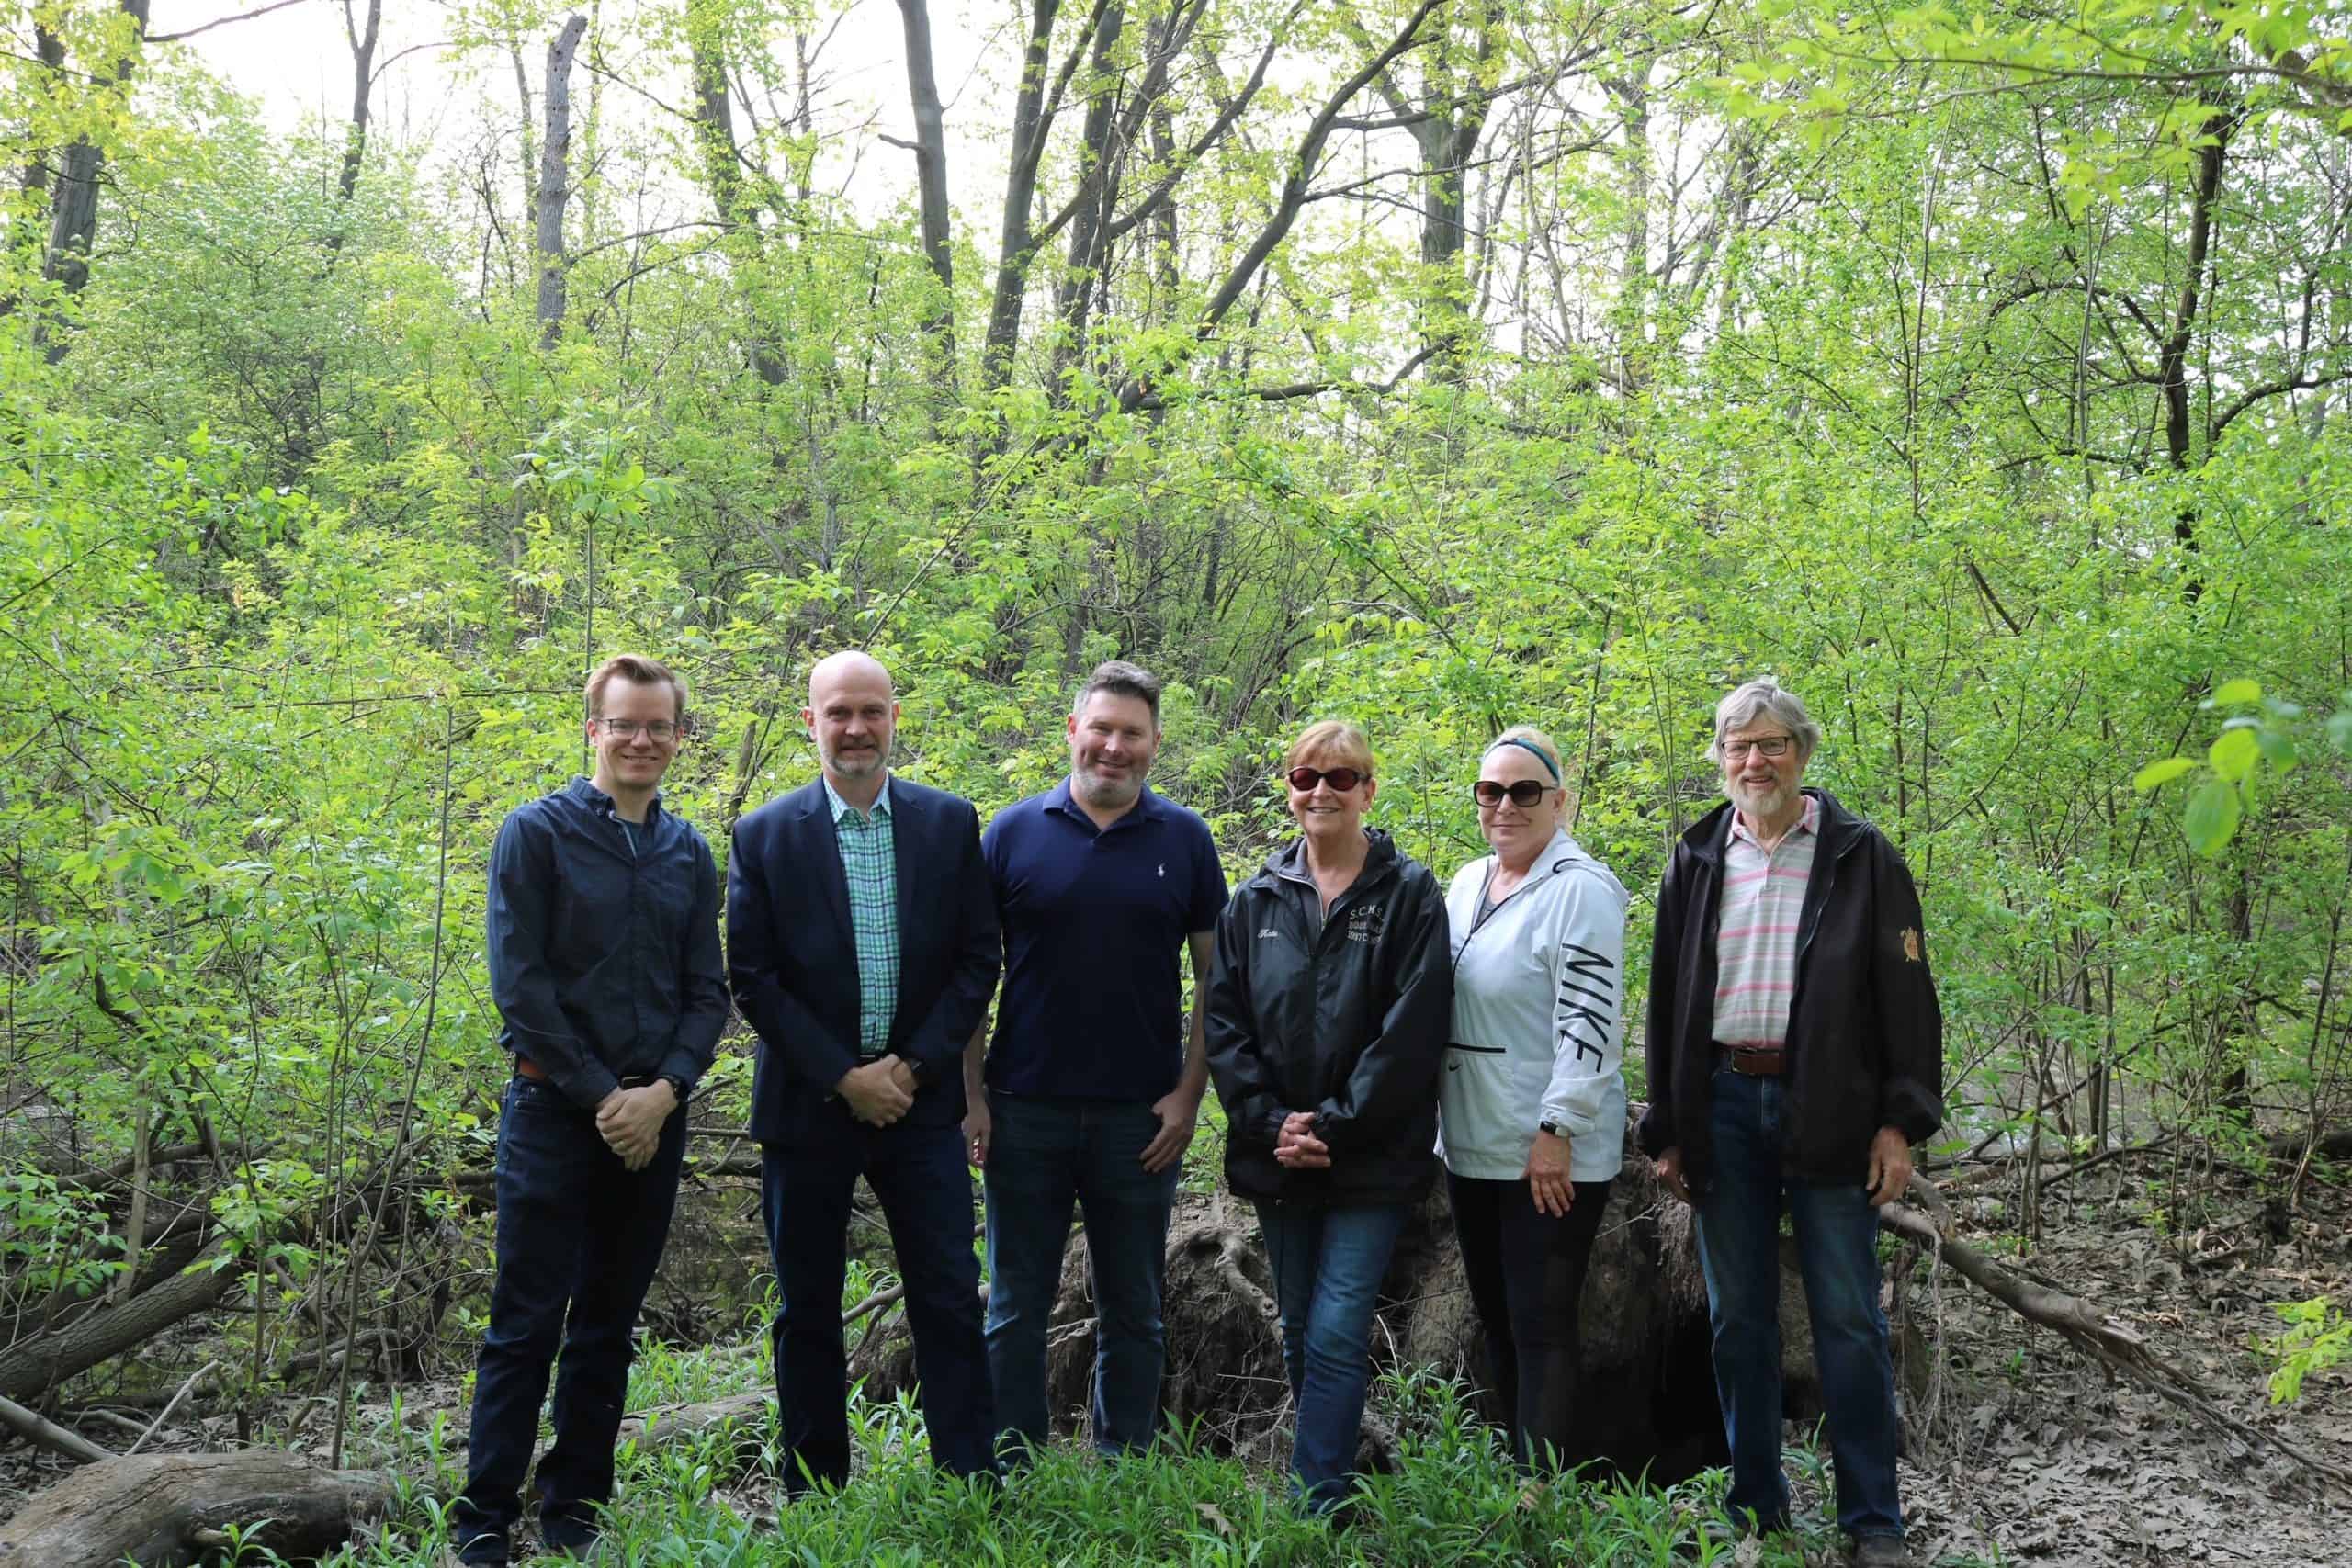 The city has acquired the protected Turtle Ponds lands in Stoney Creek. Pictured, from left to right, are: Graham McNally, representing the Patrick J McNally Foundation, Ward 10 Coun. Jeff Beattie, Todd White, Hamilton-Wentworth District School Board trustee for Wards 5 and 10, Nancy West and Loretta Crane from the Lakewood Beach Community Council, and John McNally, representing the Patrick J McNally Foundation.